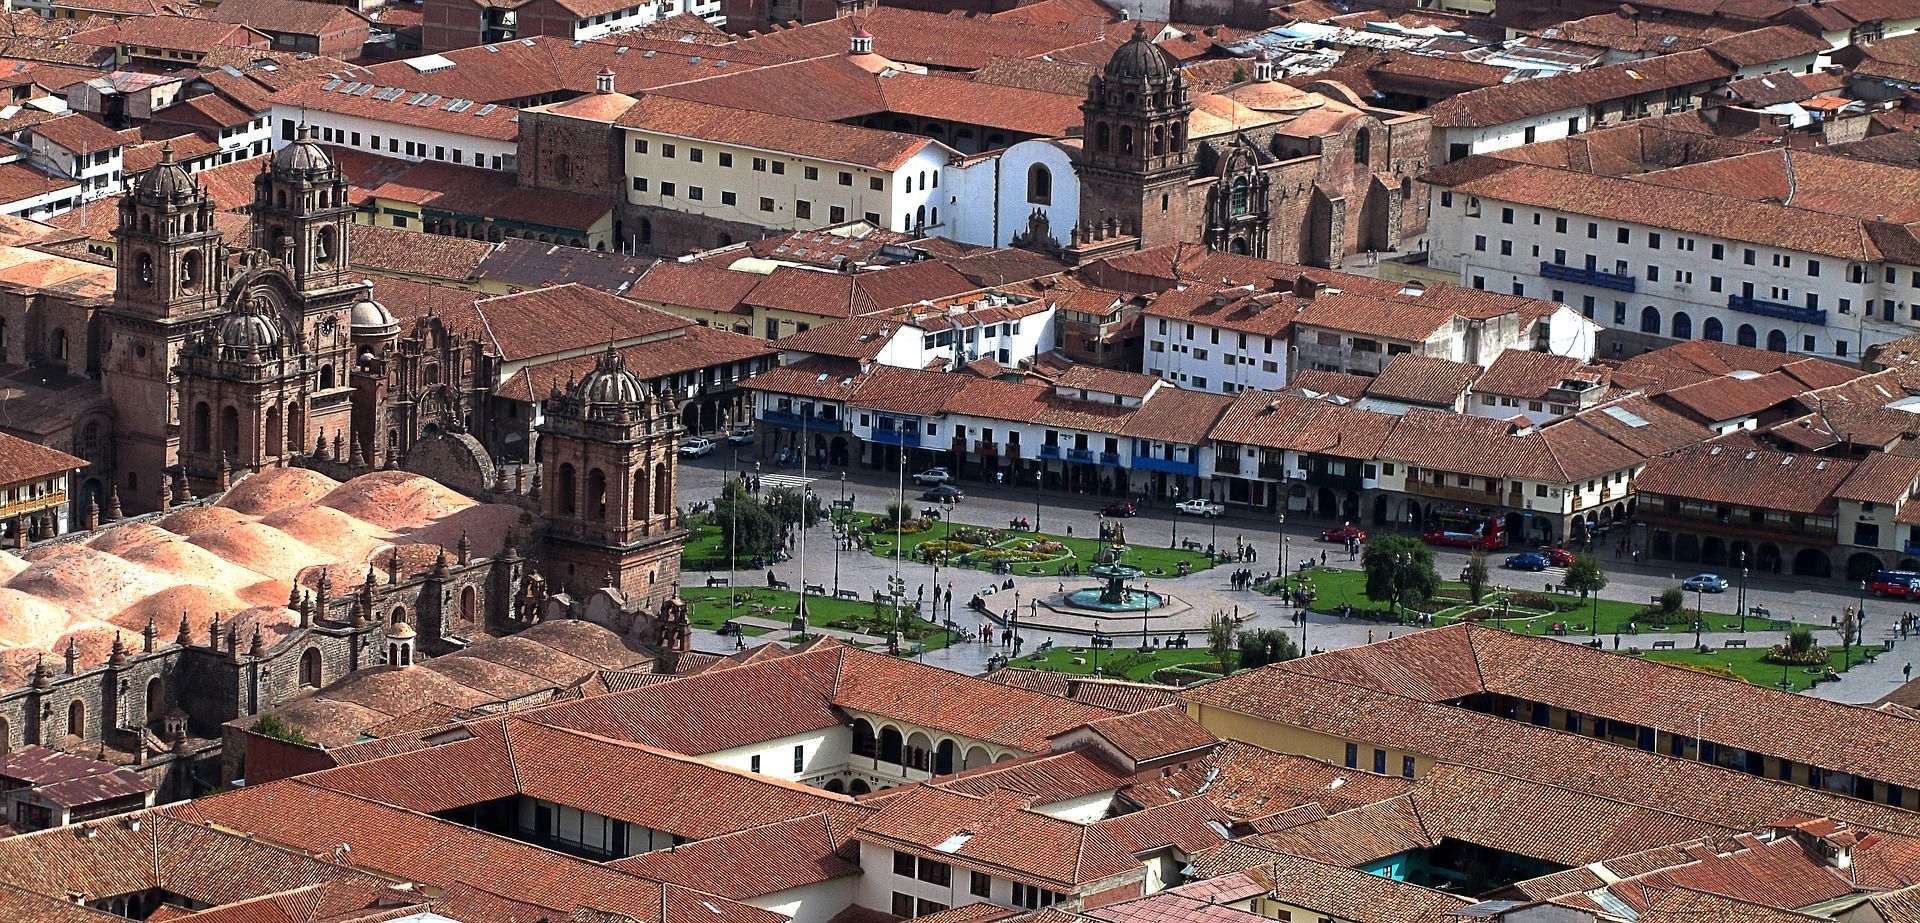 Cusco is an attractive city that's easy to walk around.